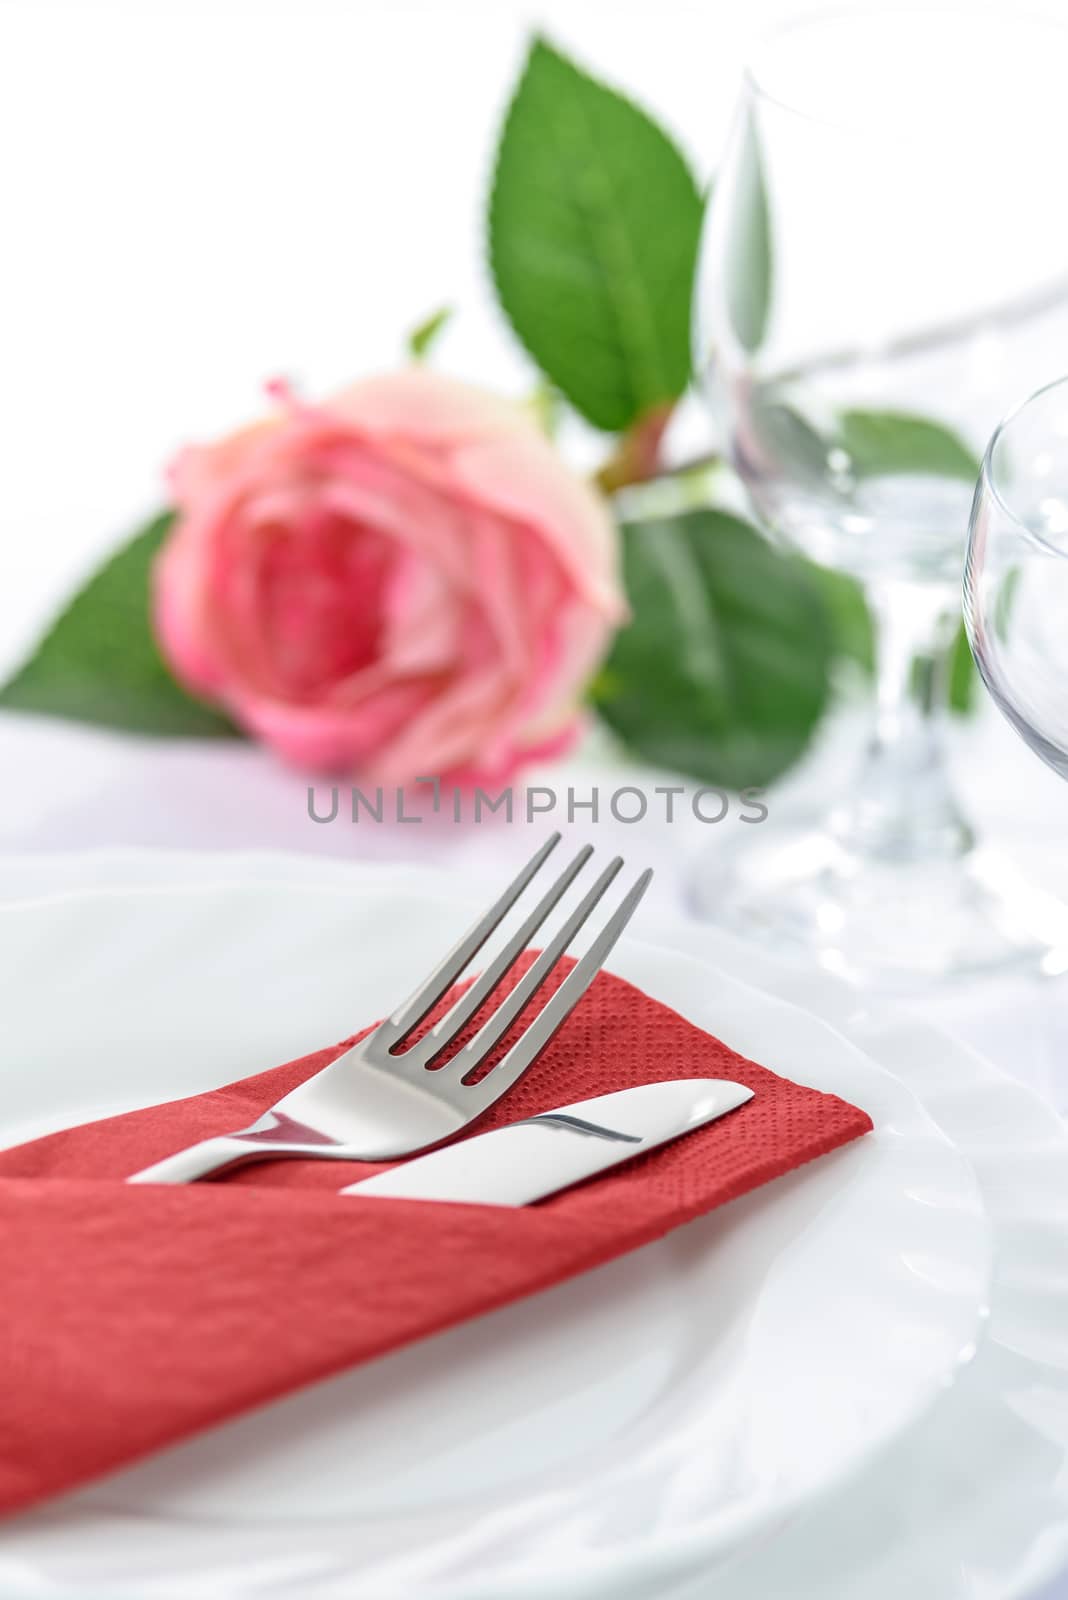 Table setting for a romantic dinner by wdnet_studio